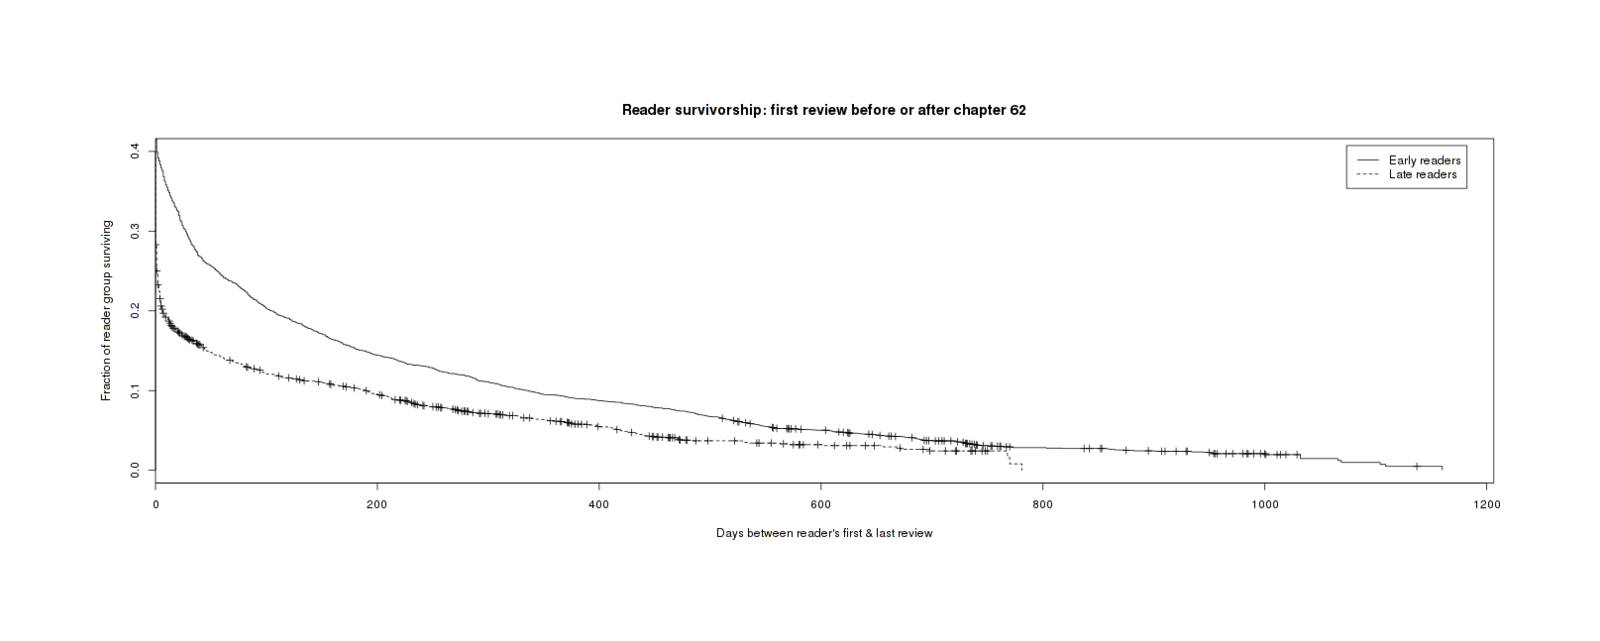 Different mortality curves for 2 groups of reviewers